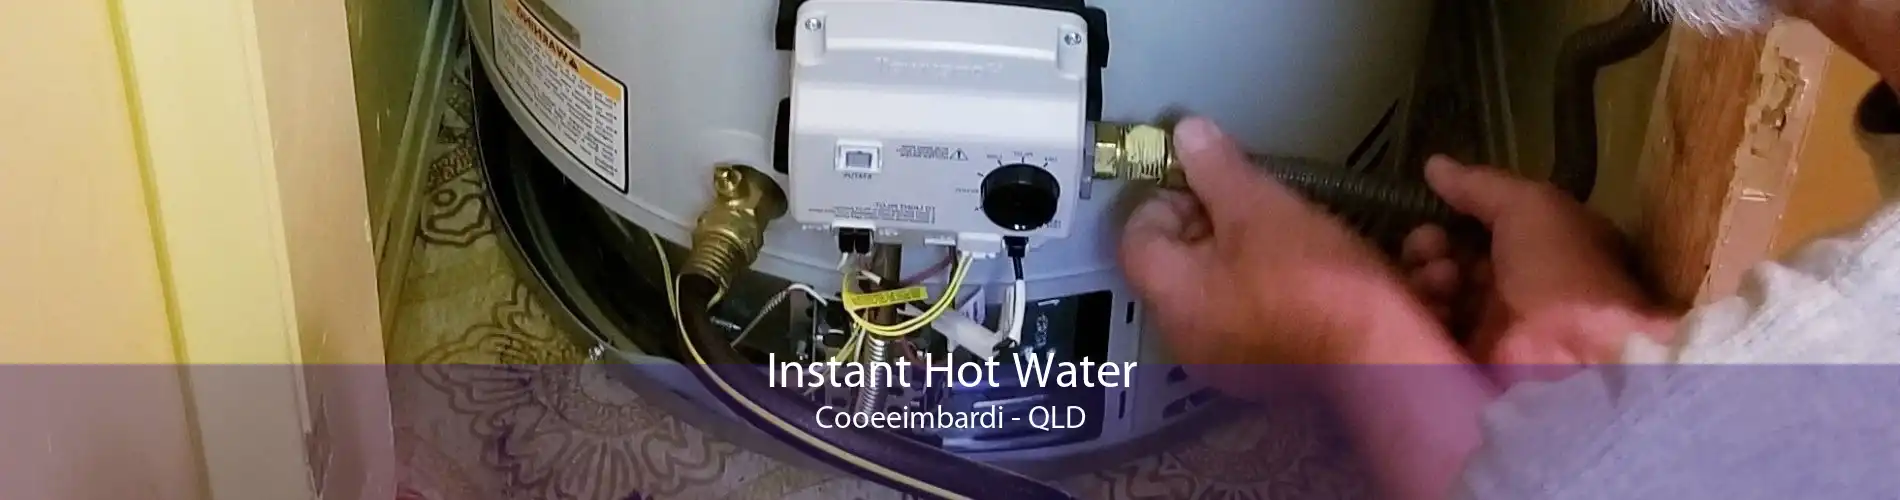 Instant Hot Water Cooeeimbardi - QLD